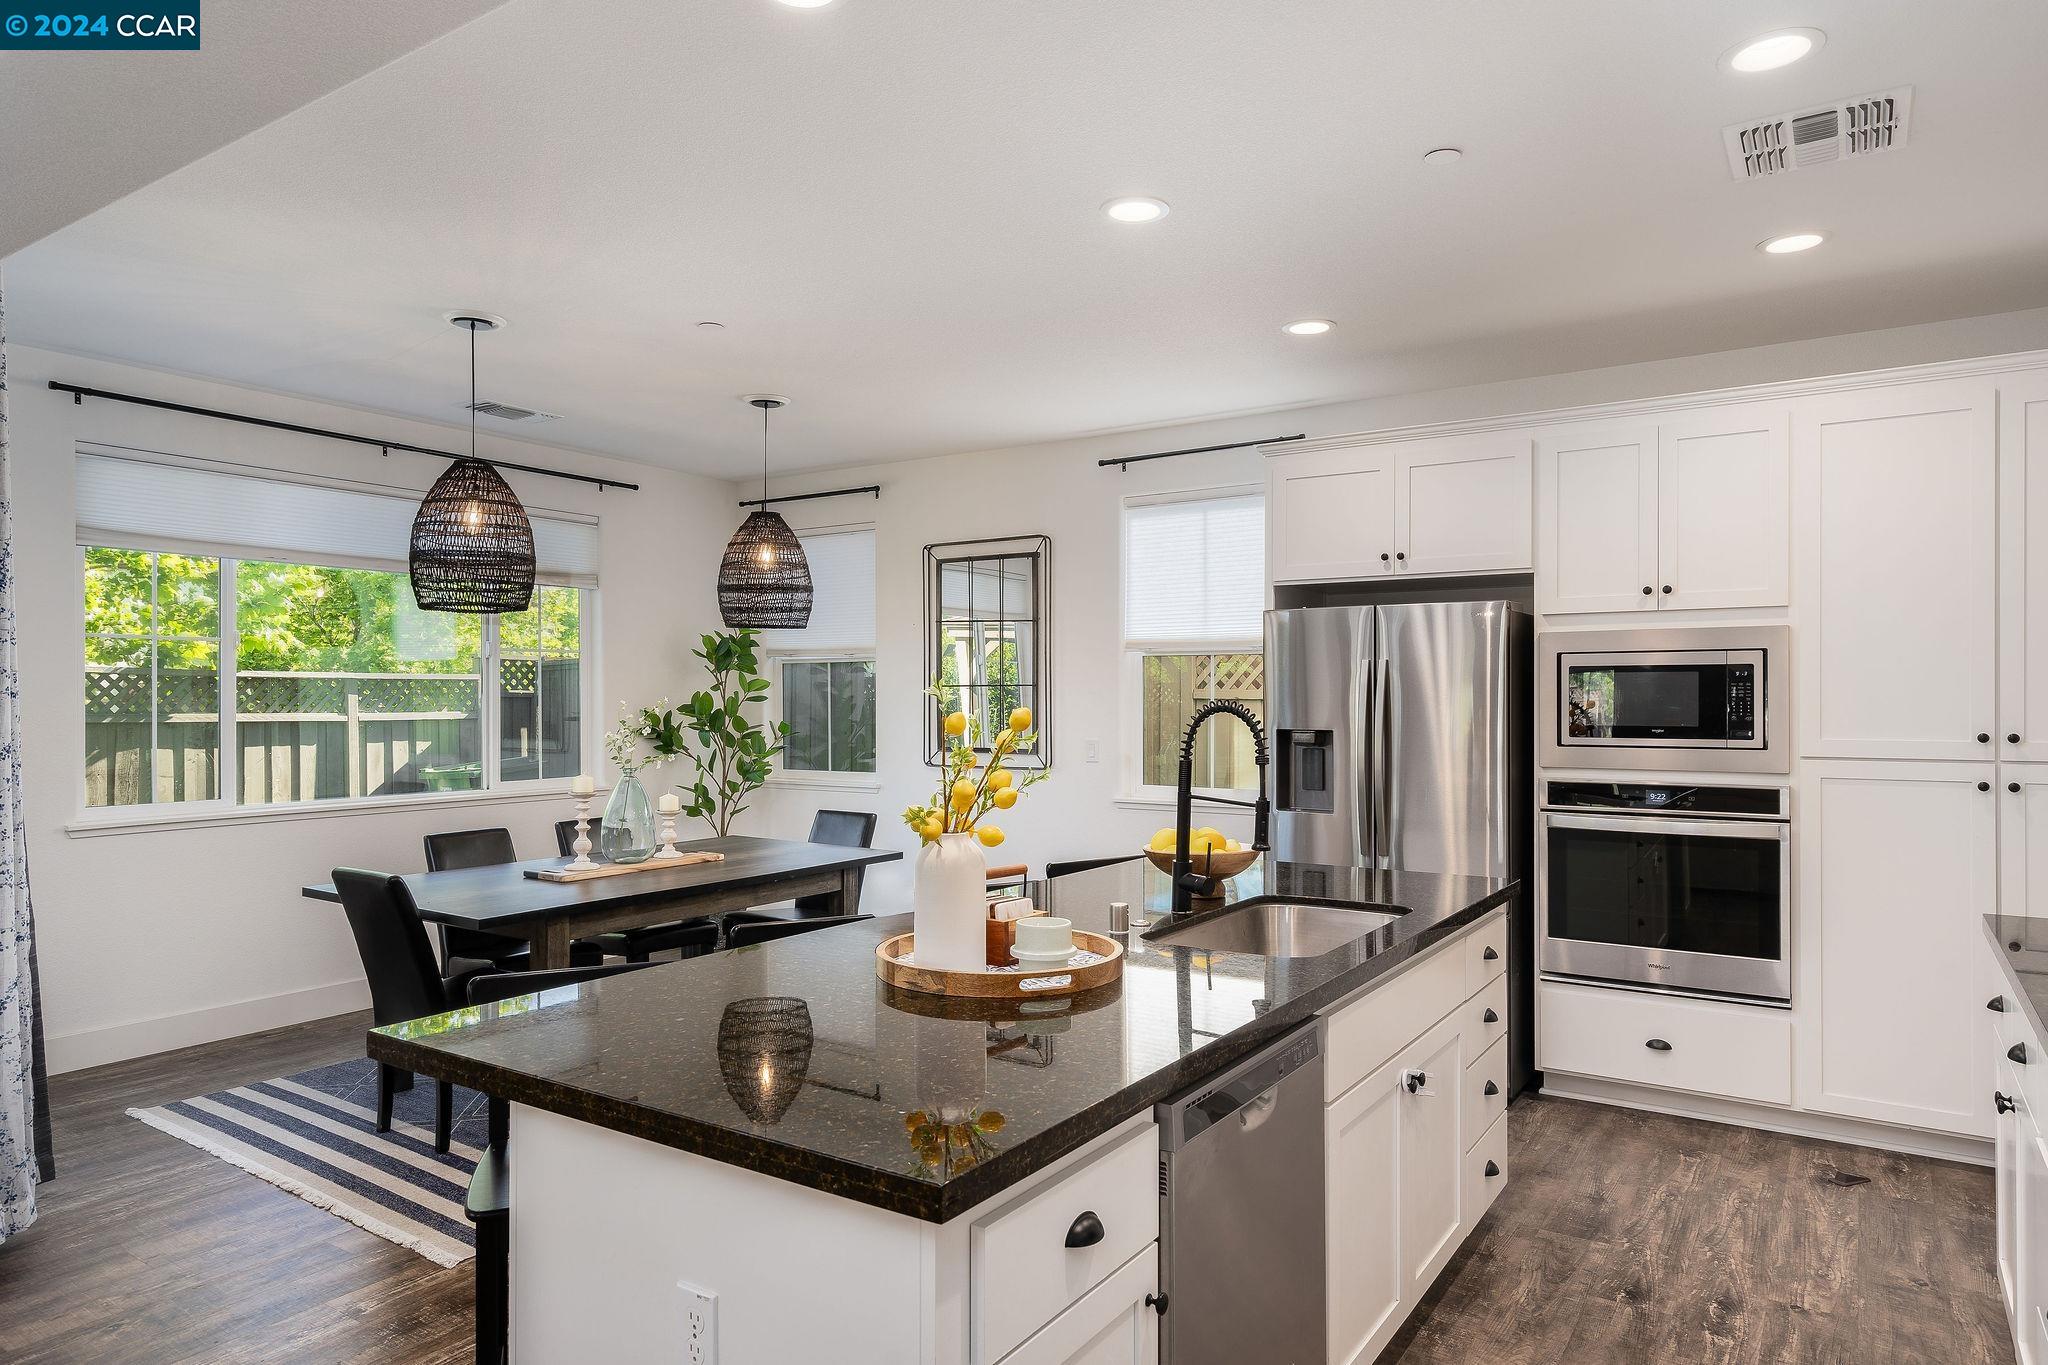 a kitchen with granite countertop a sink appliances and window